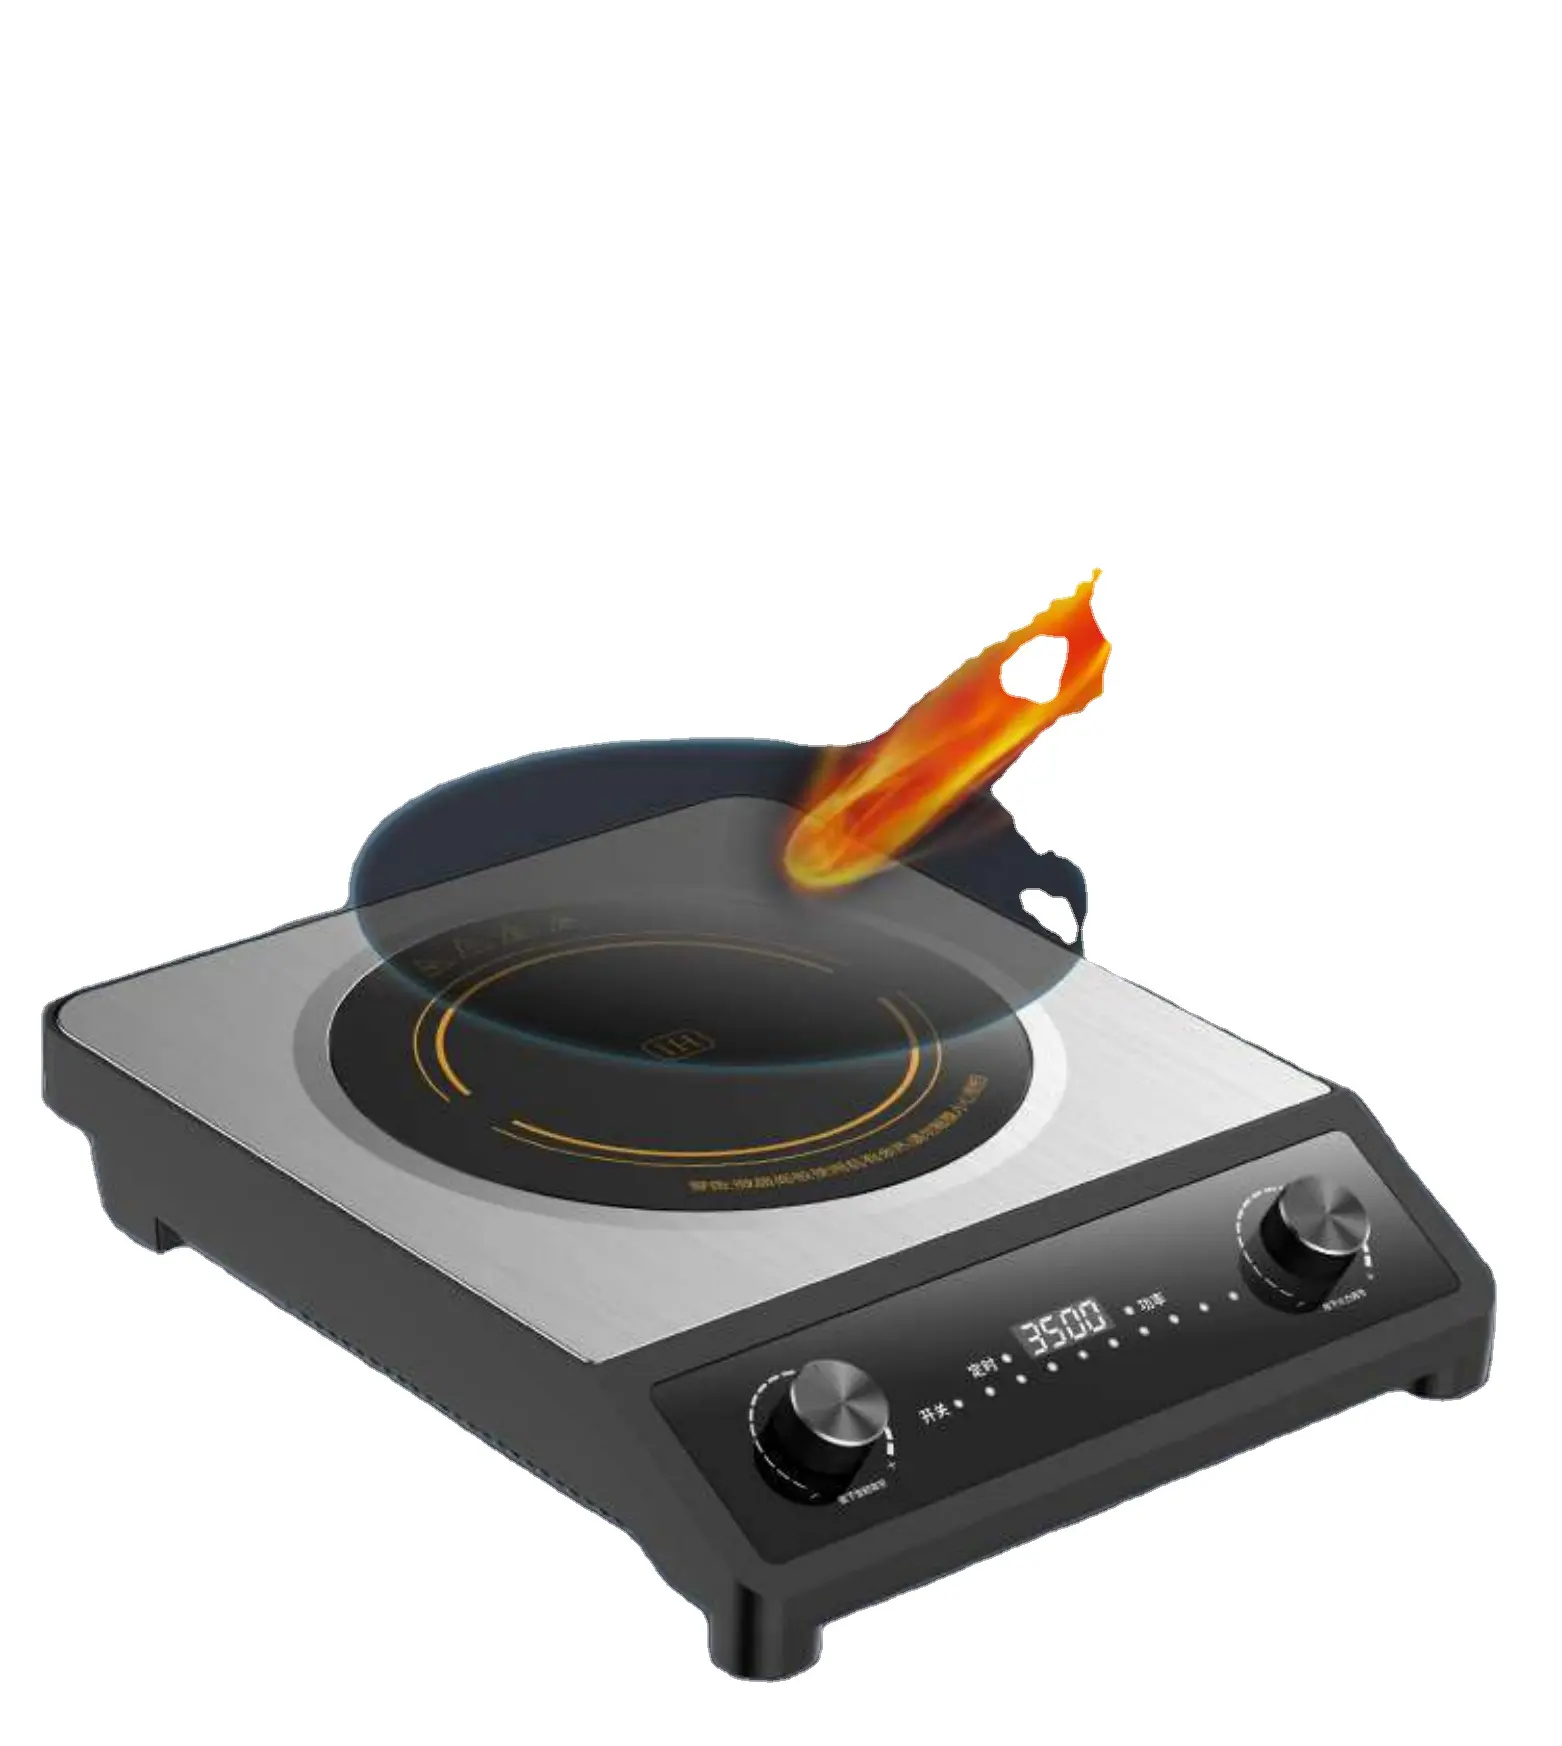 Professional Supplier Skin touch Burner Infrared Cookers Portable Induction Cooker kompor listrik electric stove price